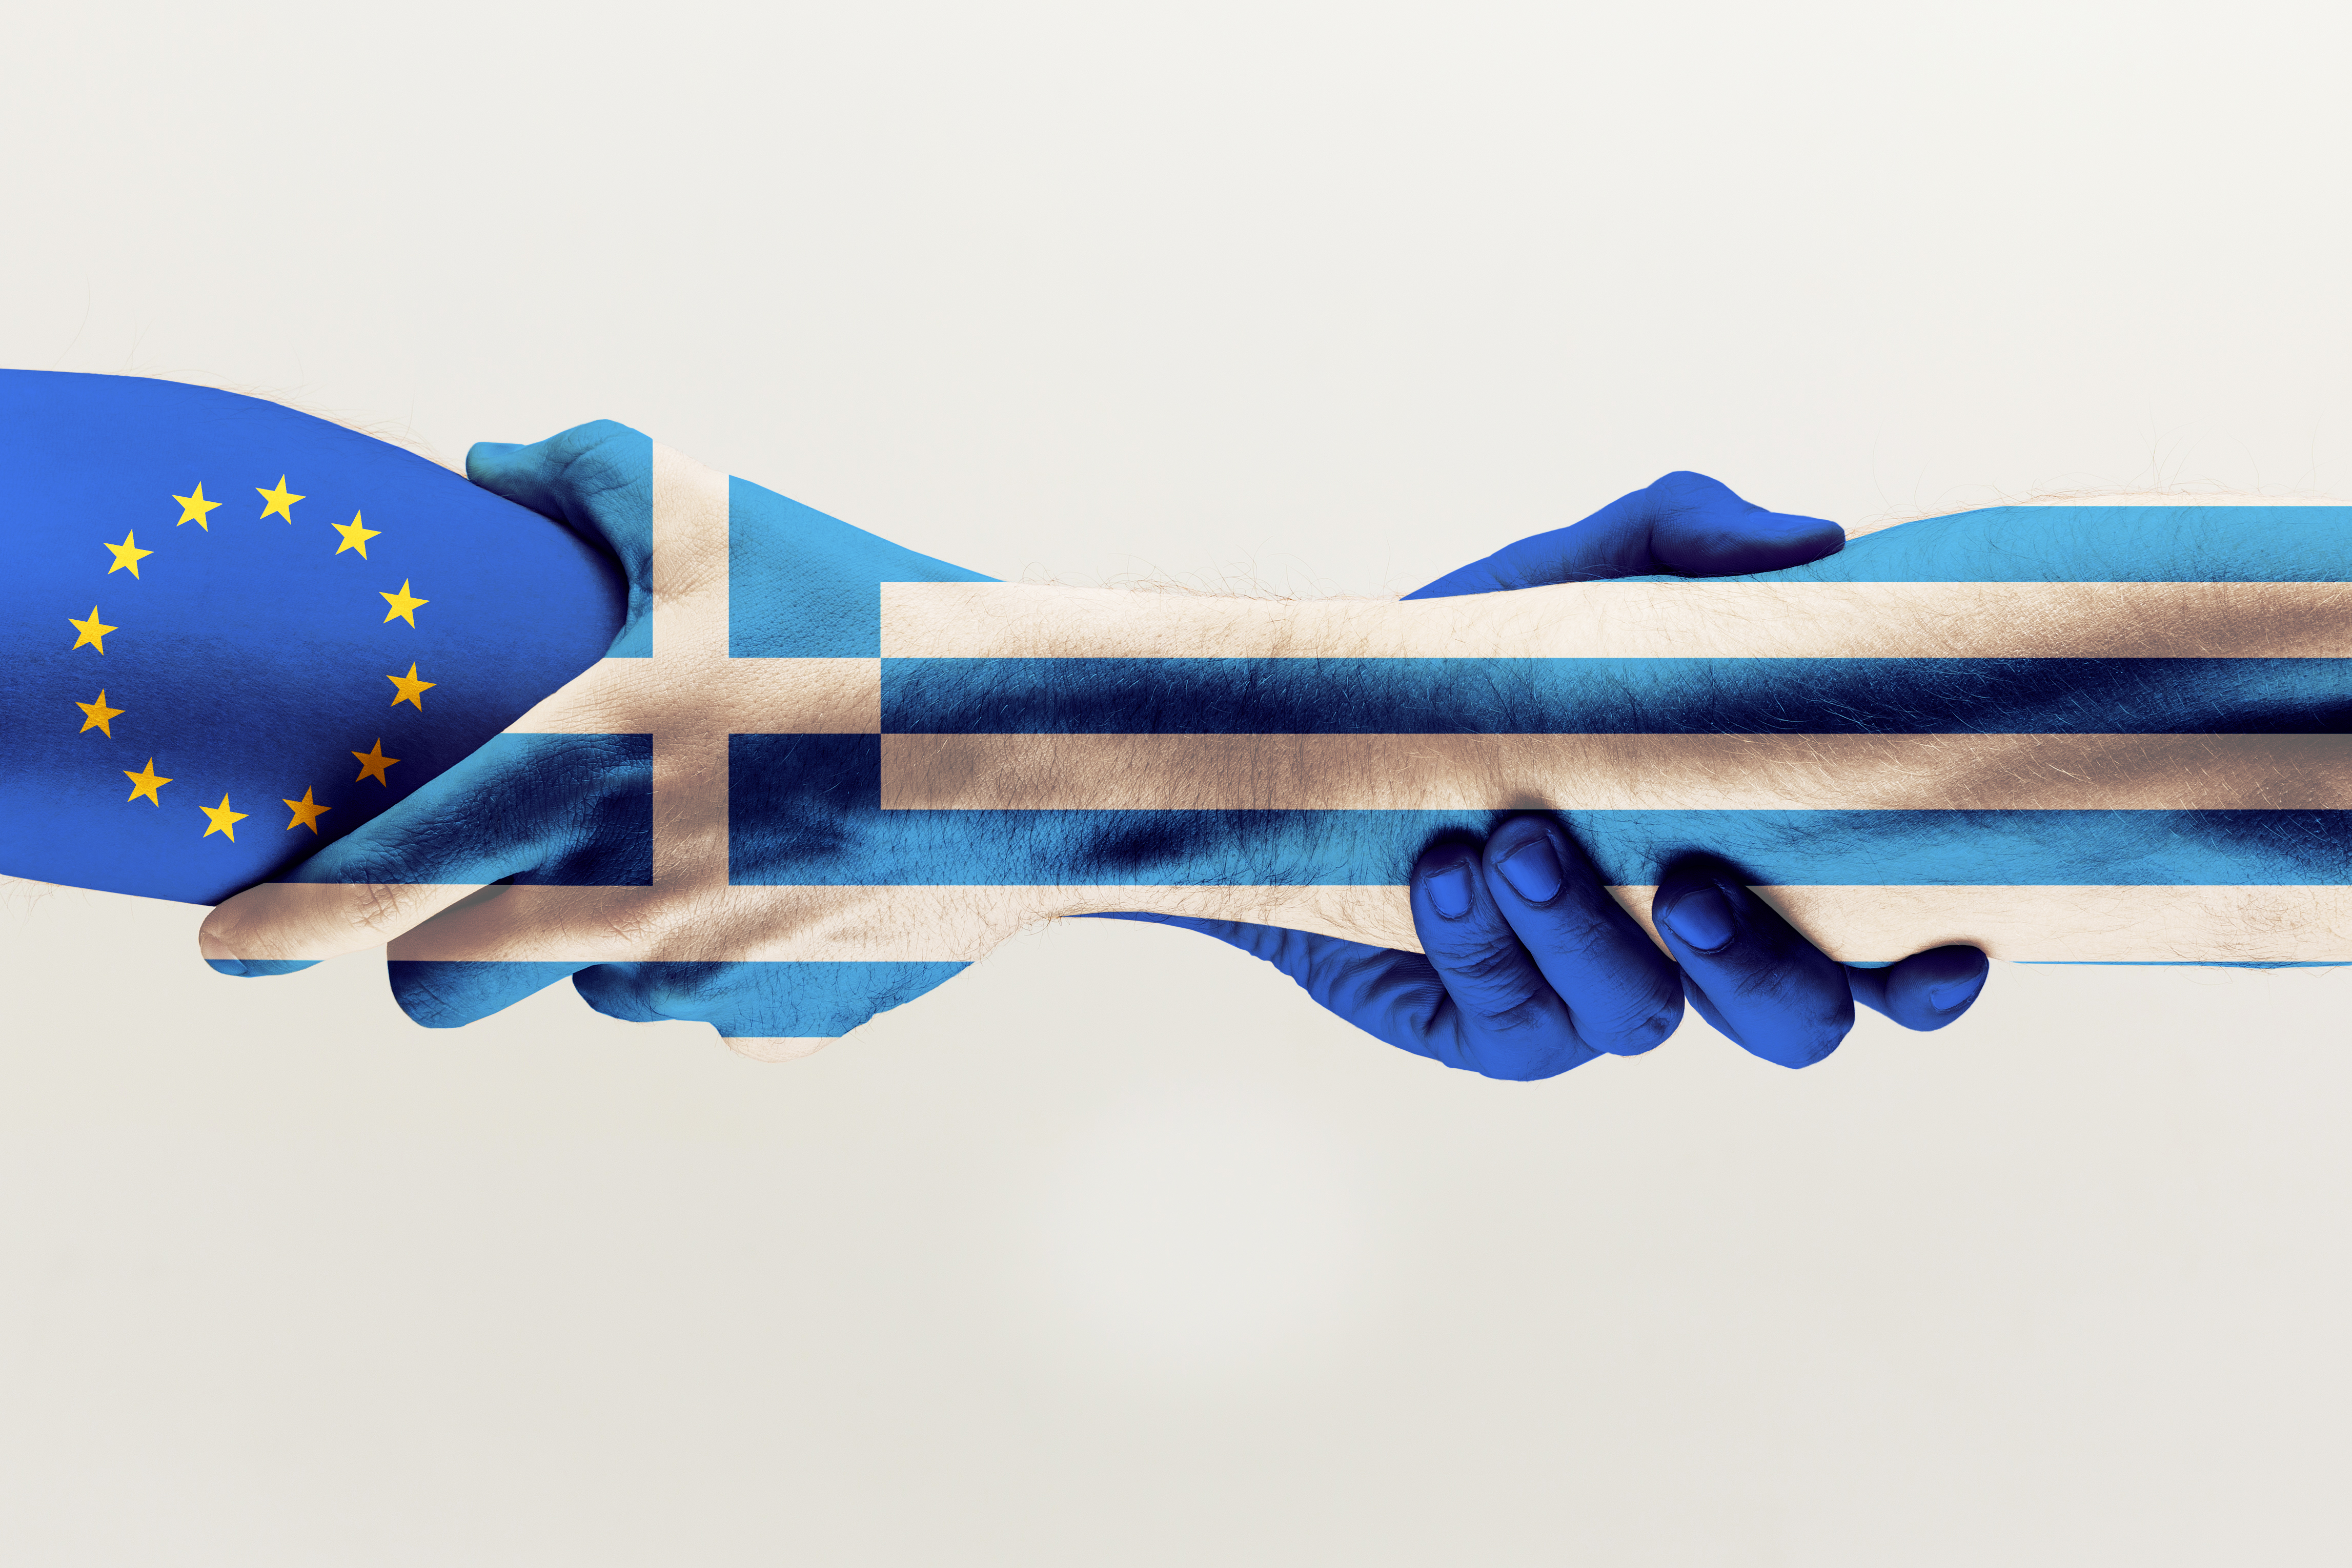 new-chances-male-hands-holding-colored-blue-eu-greece-flag-isolated-gray-studio-background-concept-help-commonwealth-partnership-countries-political-economical-relations.jpg (7.44 MB)